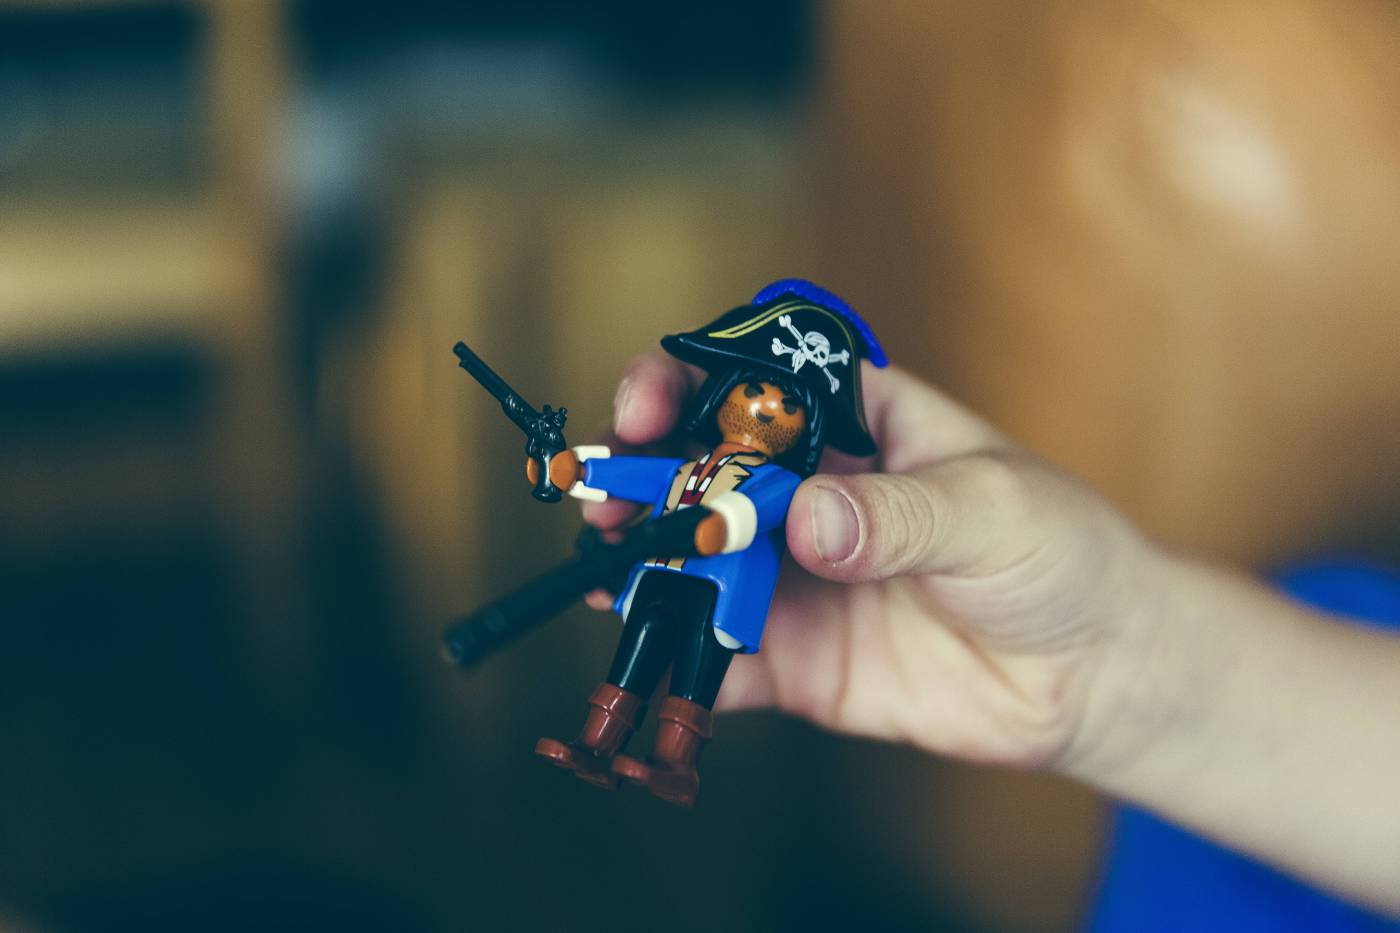 pirate pawn game toy/ picture